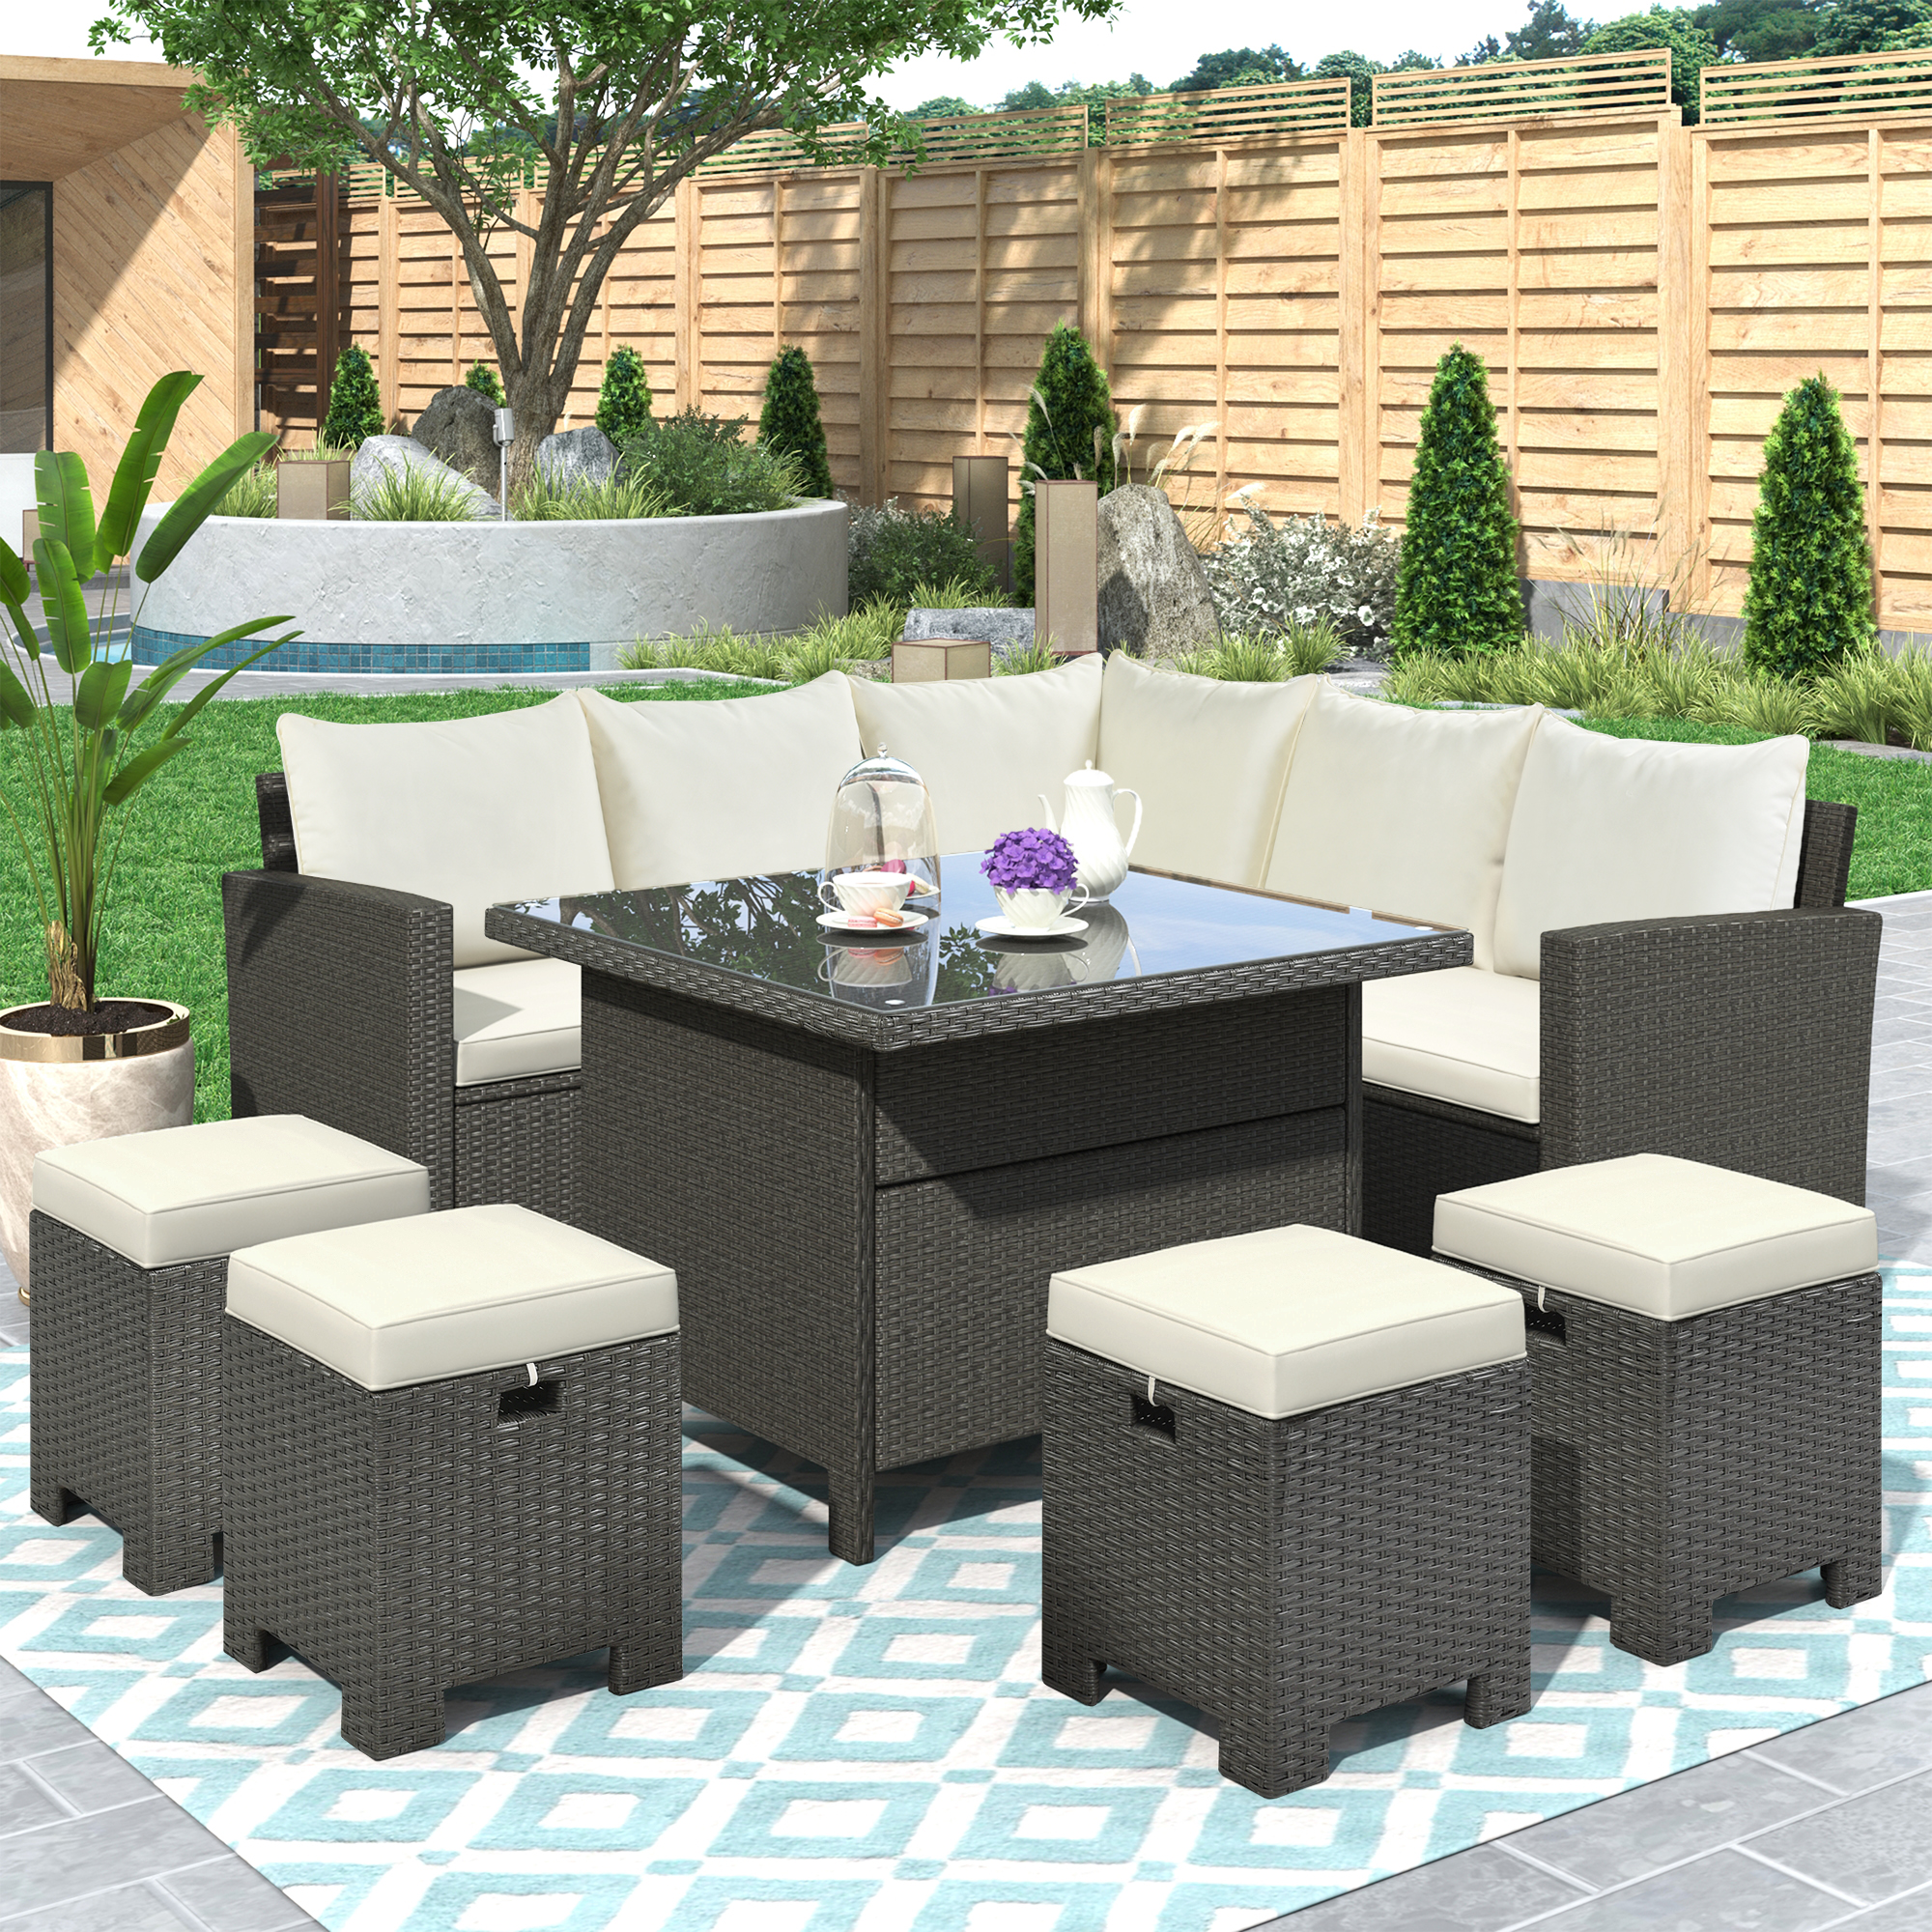 Patio Furniture Set, 8 Piece Outdoor Conversation Set, Dining Table Chair with Ottoman, Cushions-Boyel Living